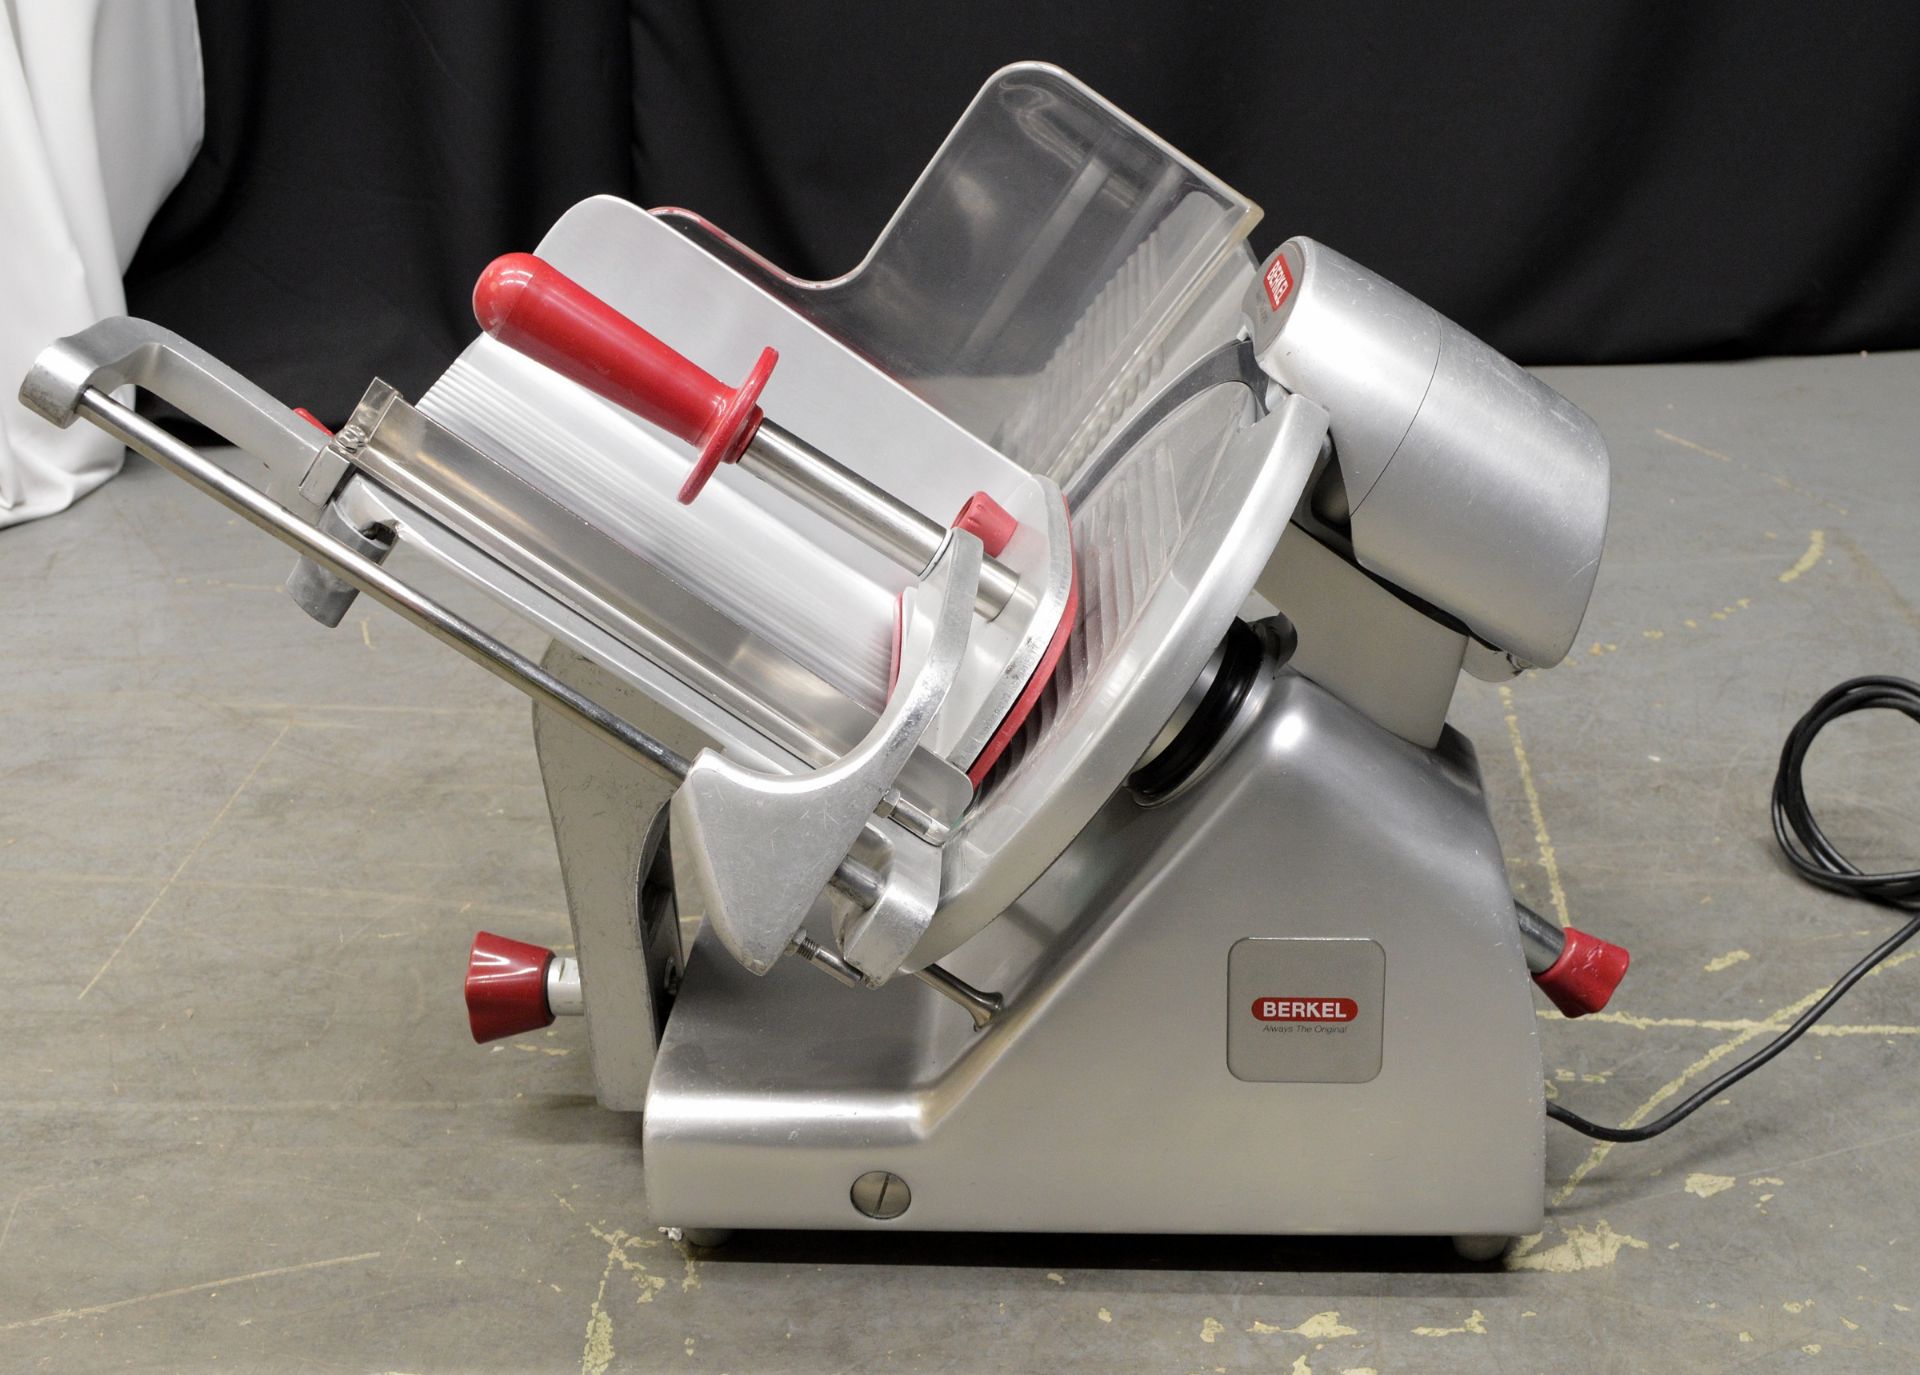 Berkel BSPGL04011A0F 12" Commercial Cooked Meat / Bacon Slicer, single phase electric - Image 2 of 7